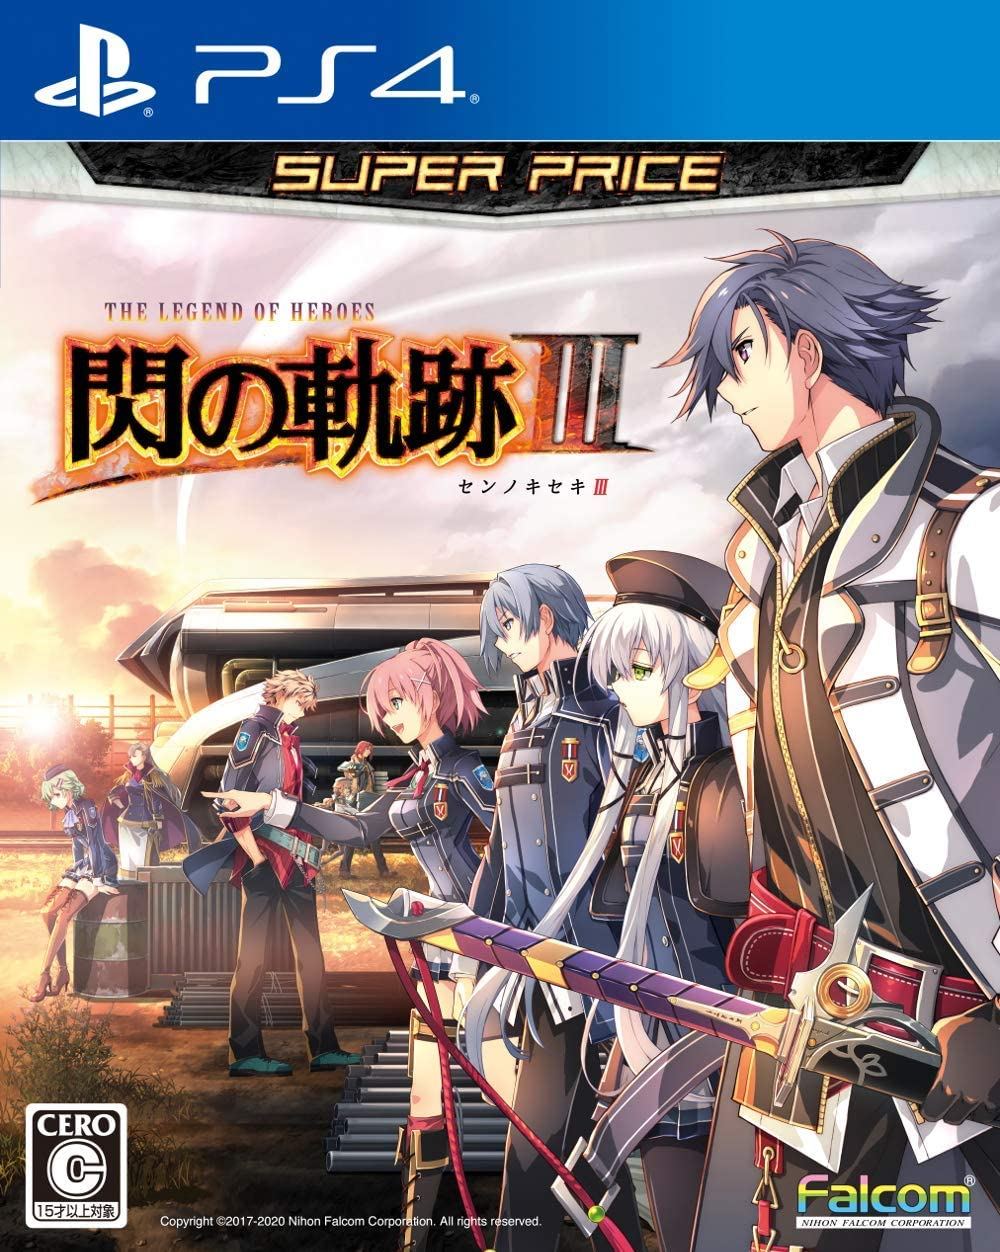 The Legend Heroes: Trails of Cold III (Super Price) for PlayStation 4